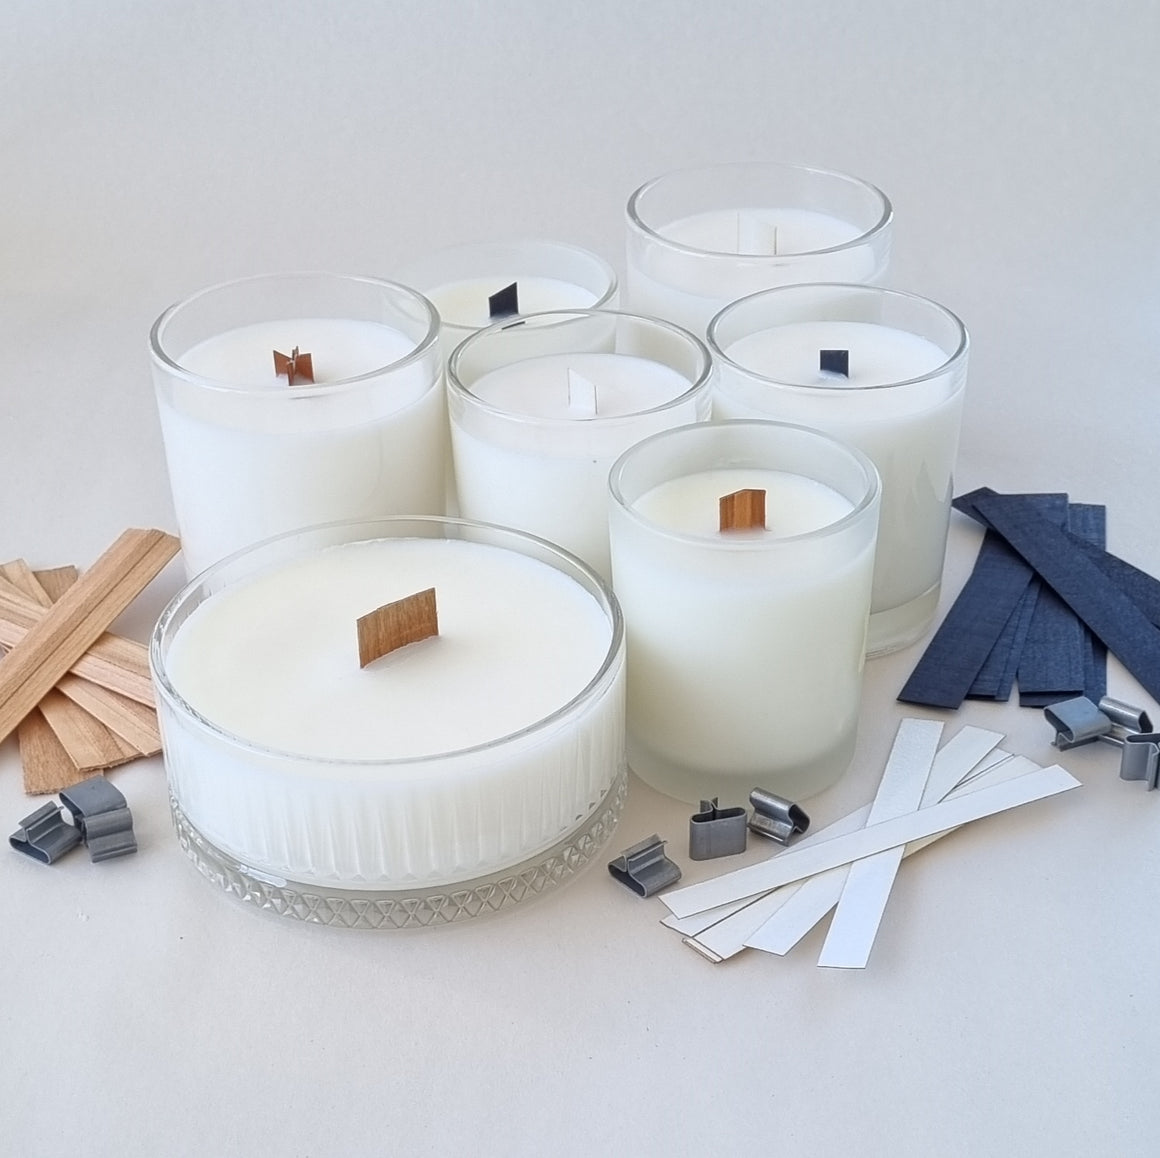 Candle Making Wicks - All Australian Candle Making Supplies and